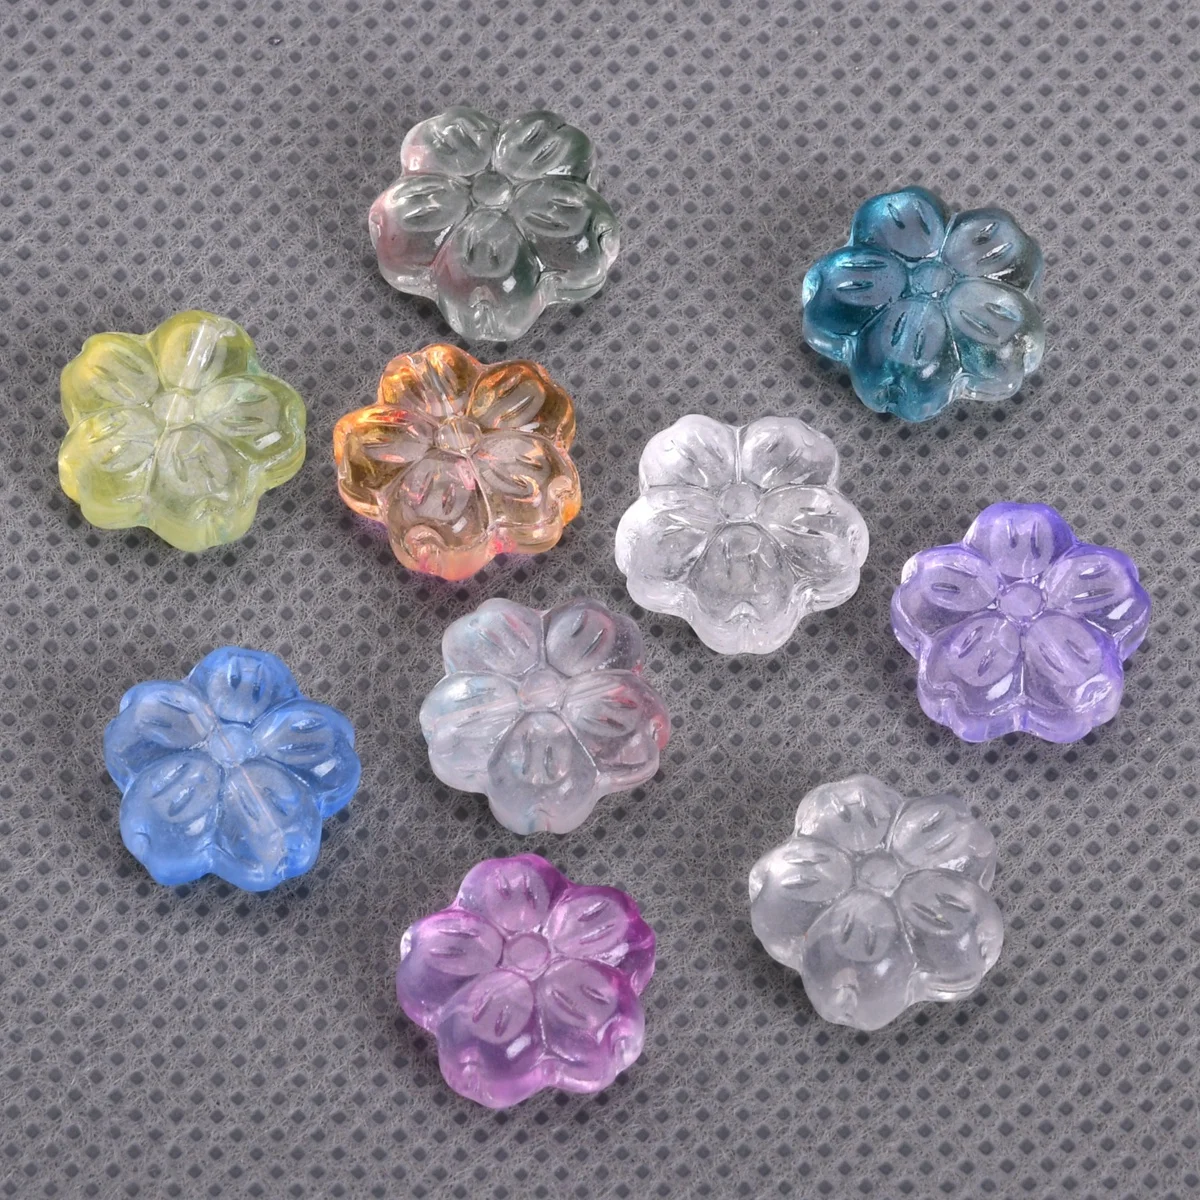 10pcs Mixed 14mm Flower Shape Handmade Lampwork Glass Loose Beads For Jewelry Making DIY Crafts Findings 10pcs 10mm random mixed colors round crystal glass ball